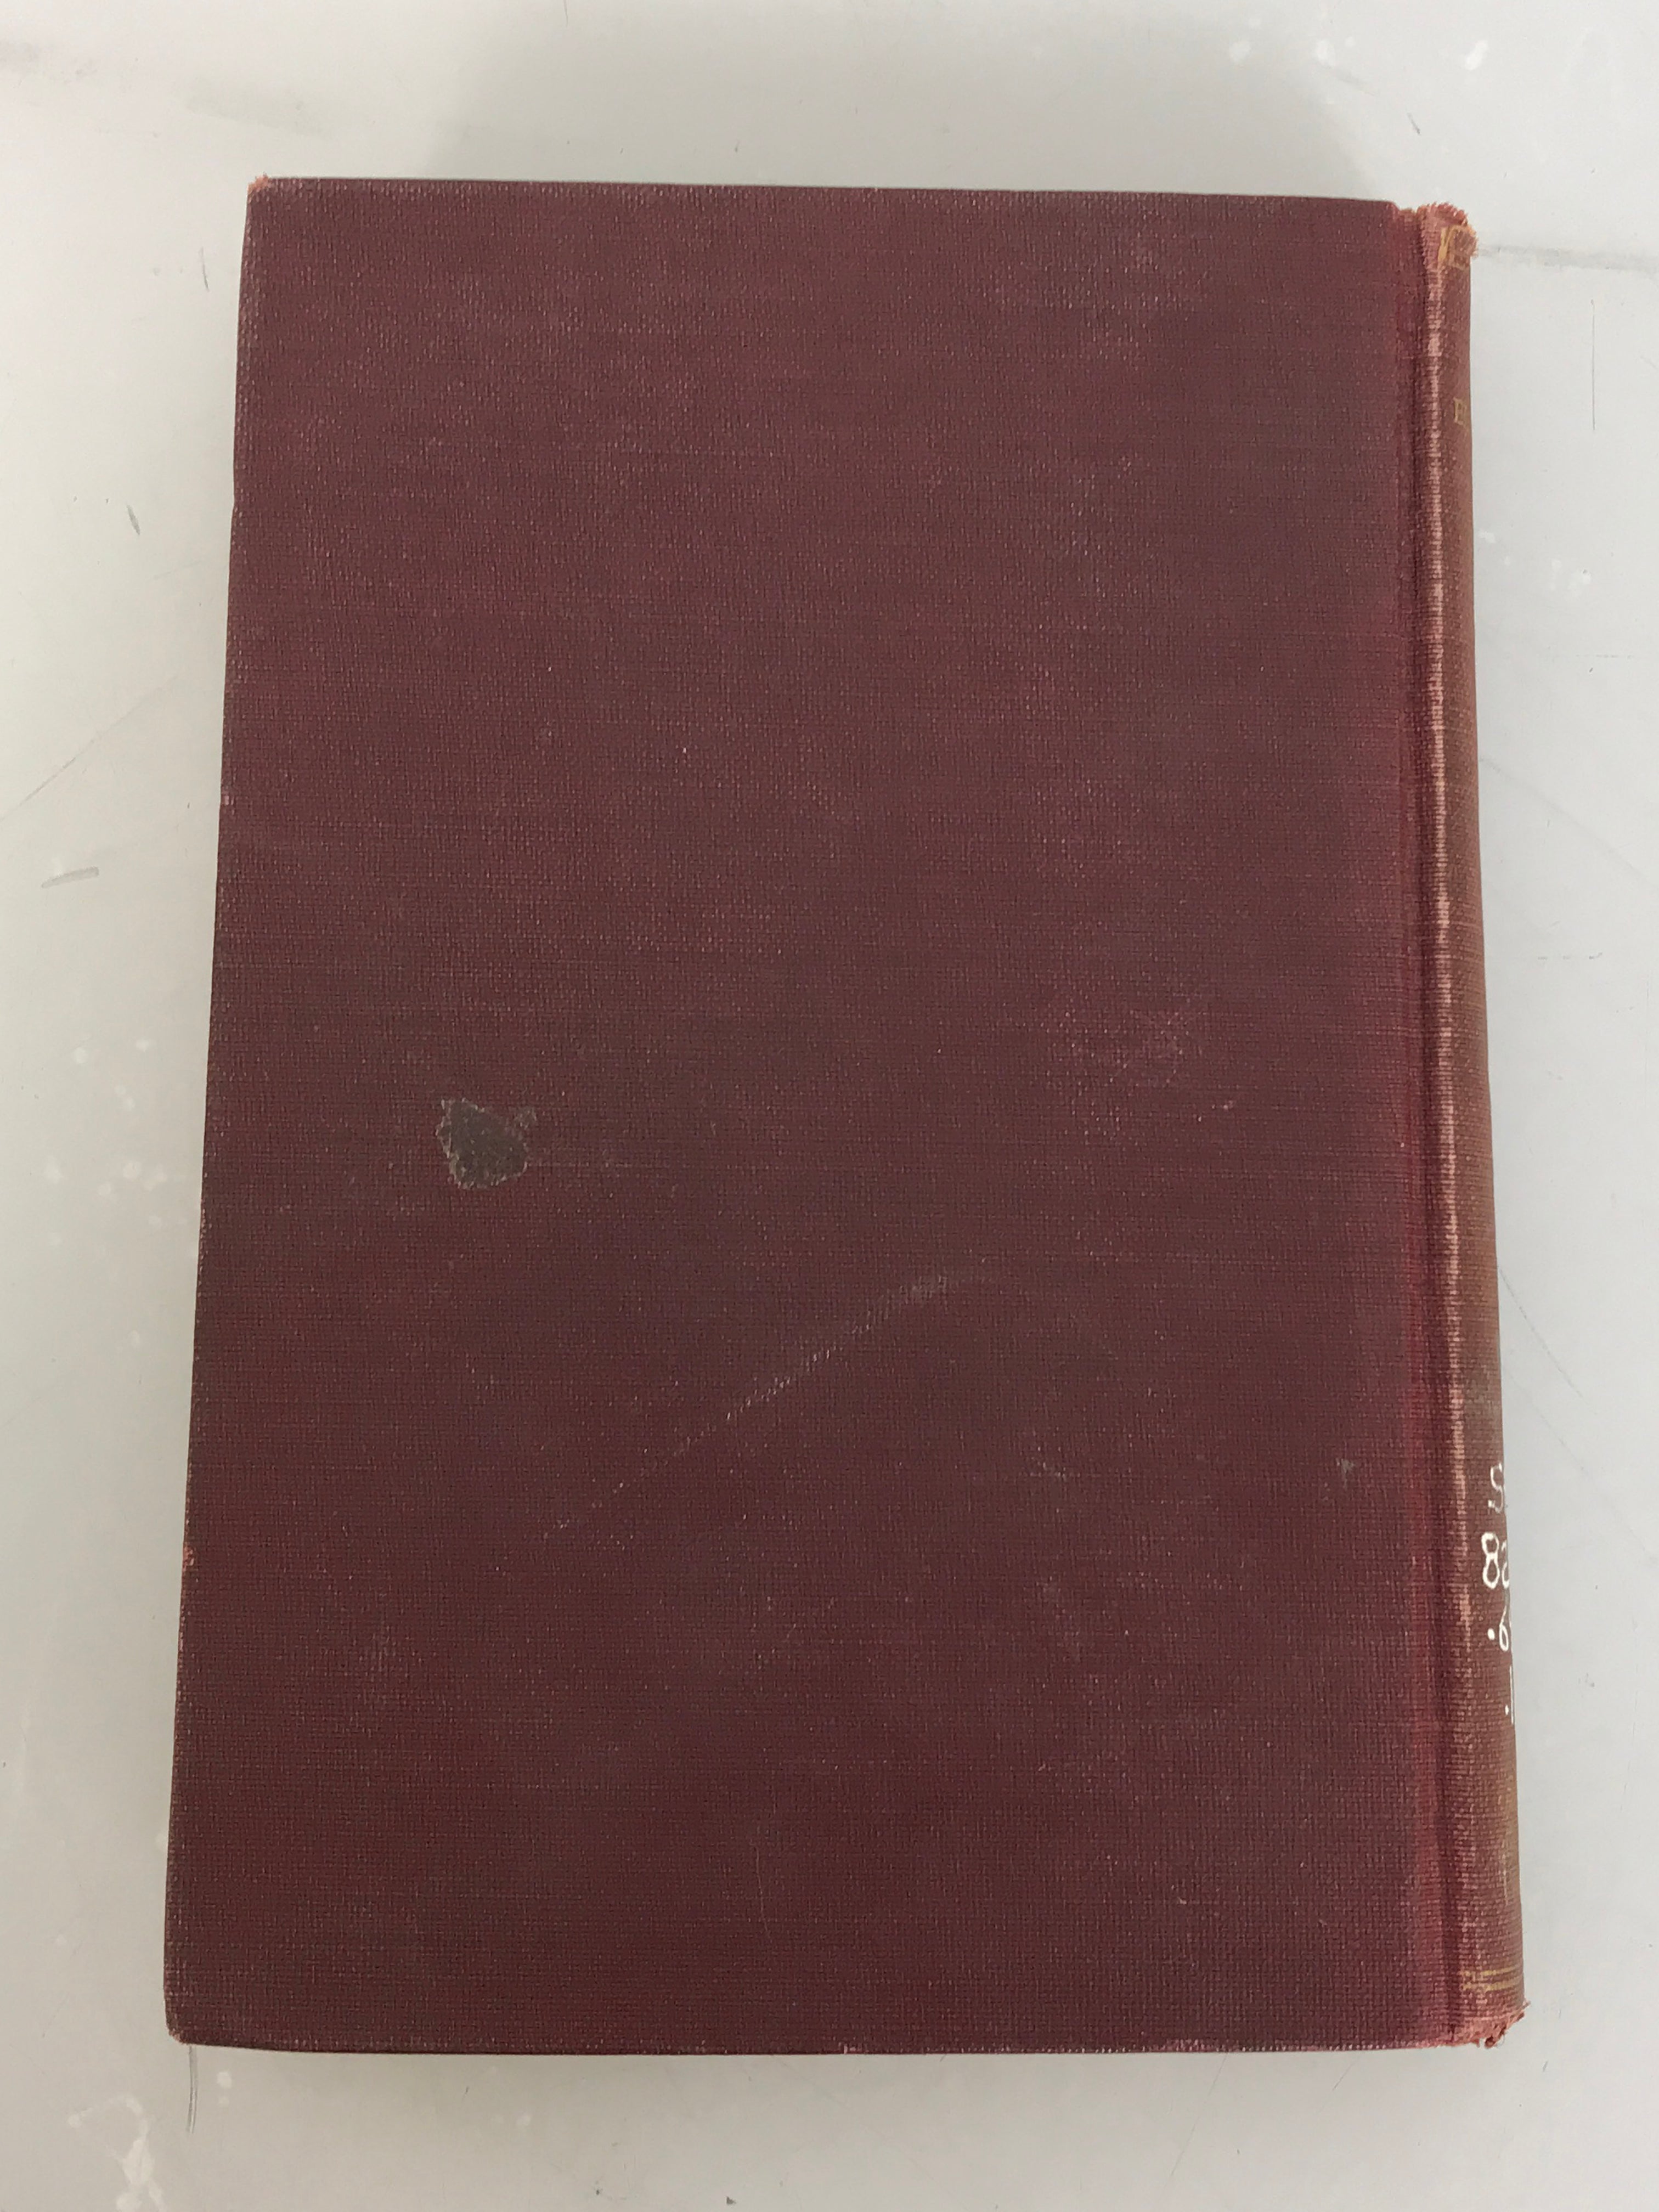 The Electron by Robert Andrews Millikan 1927 HC